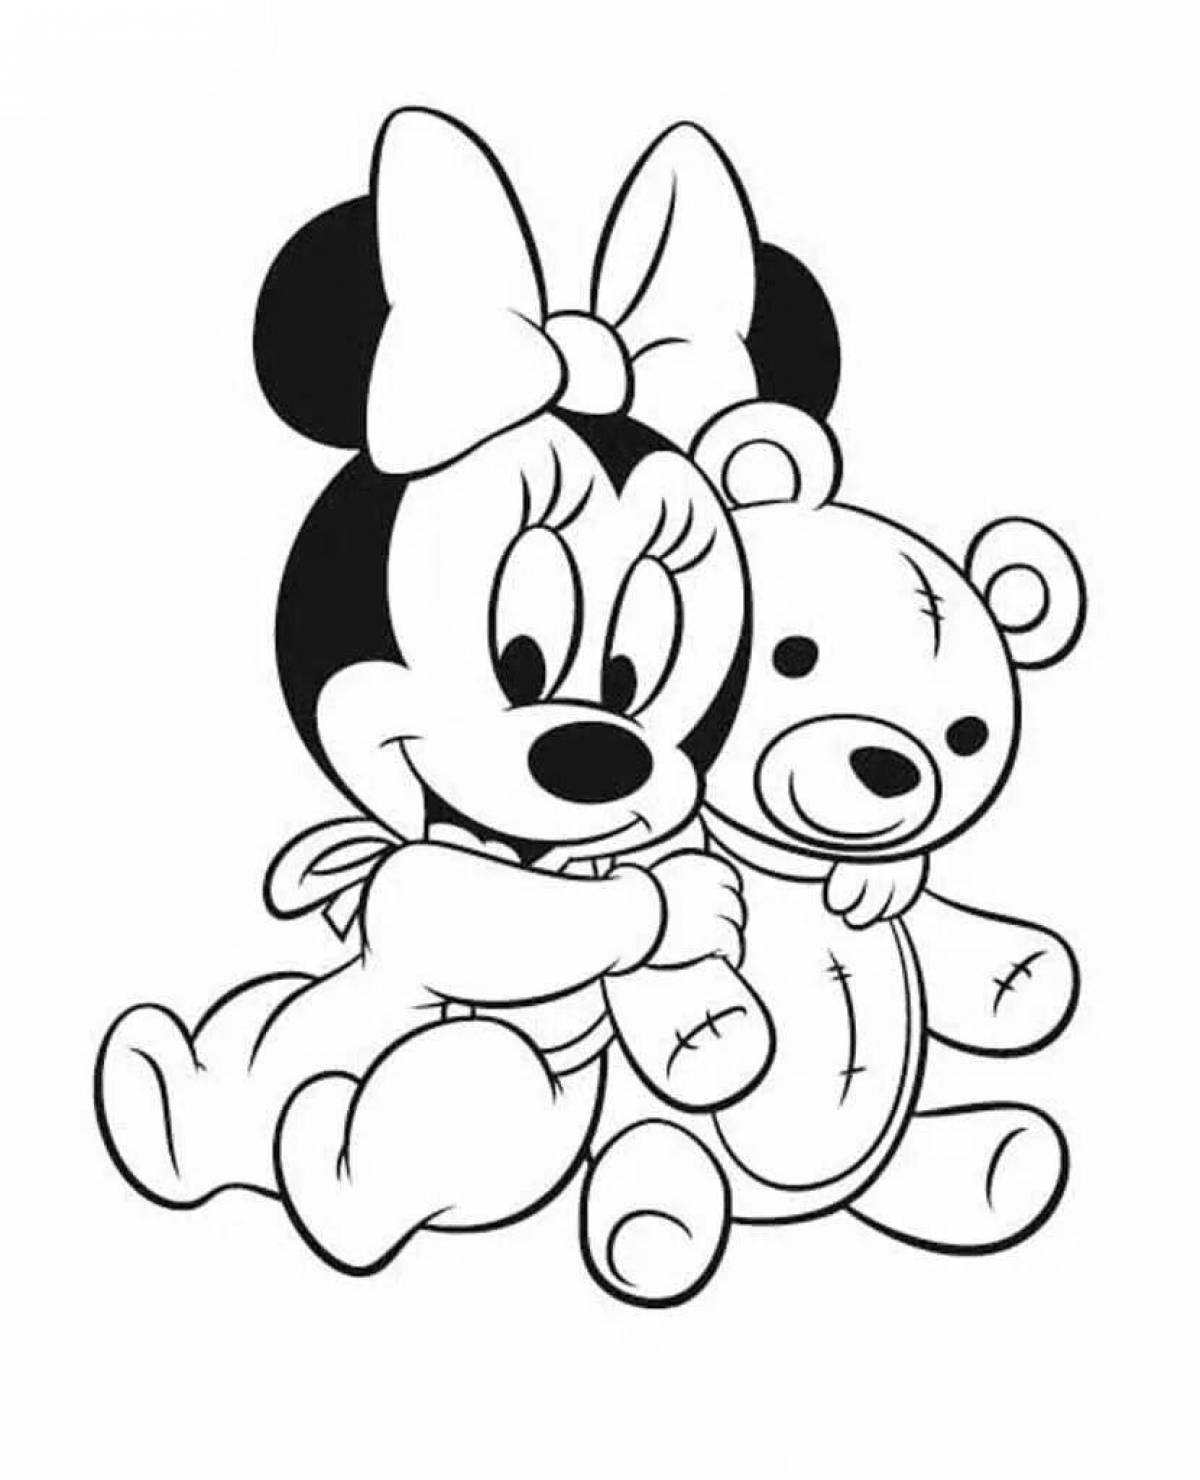 Exciting mickey mouse coloring book